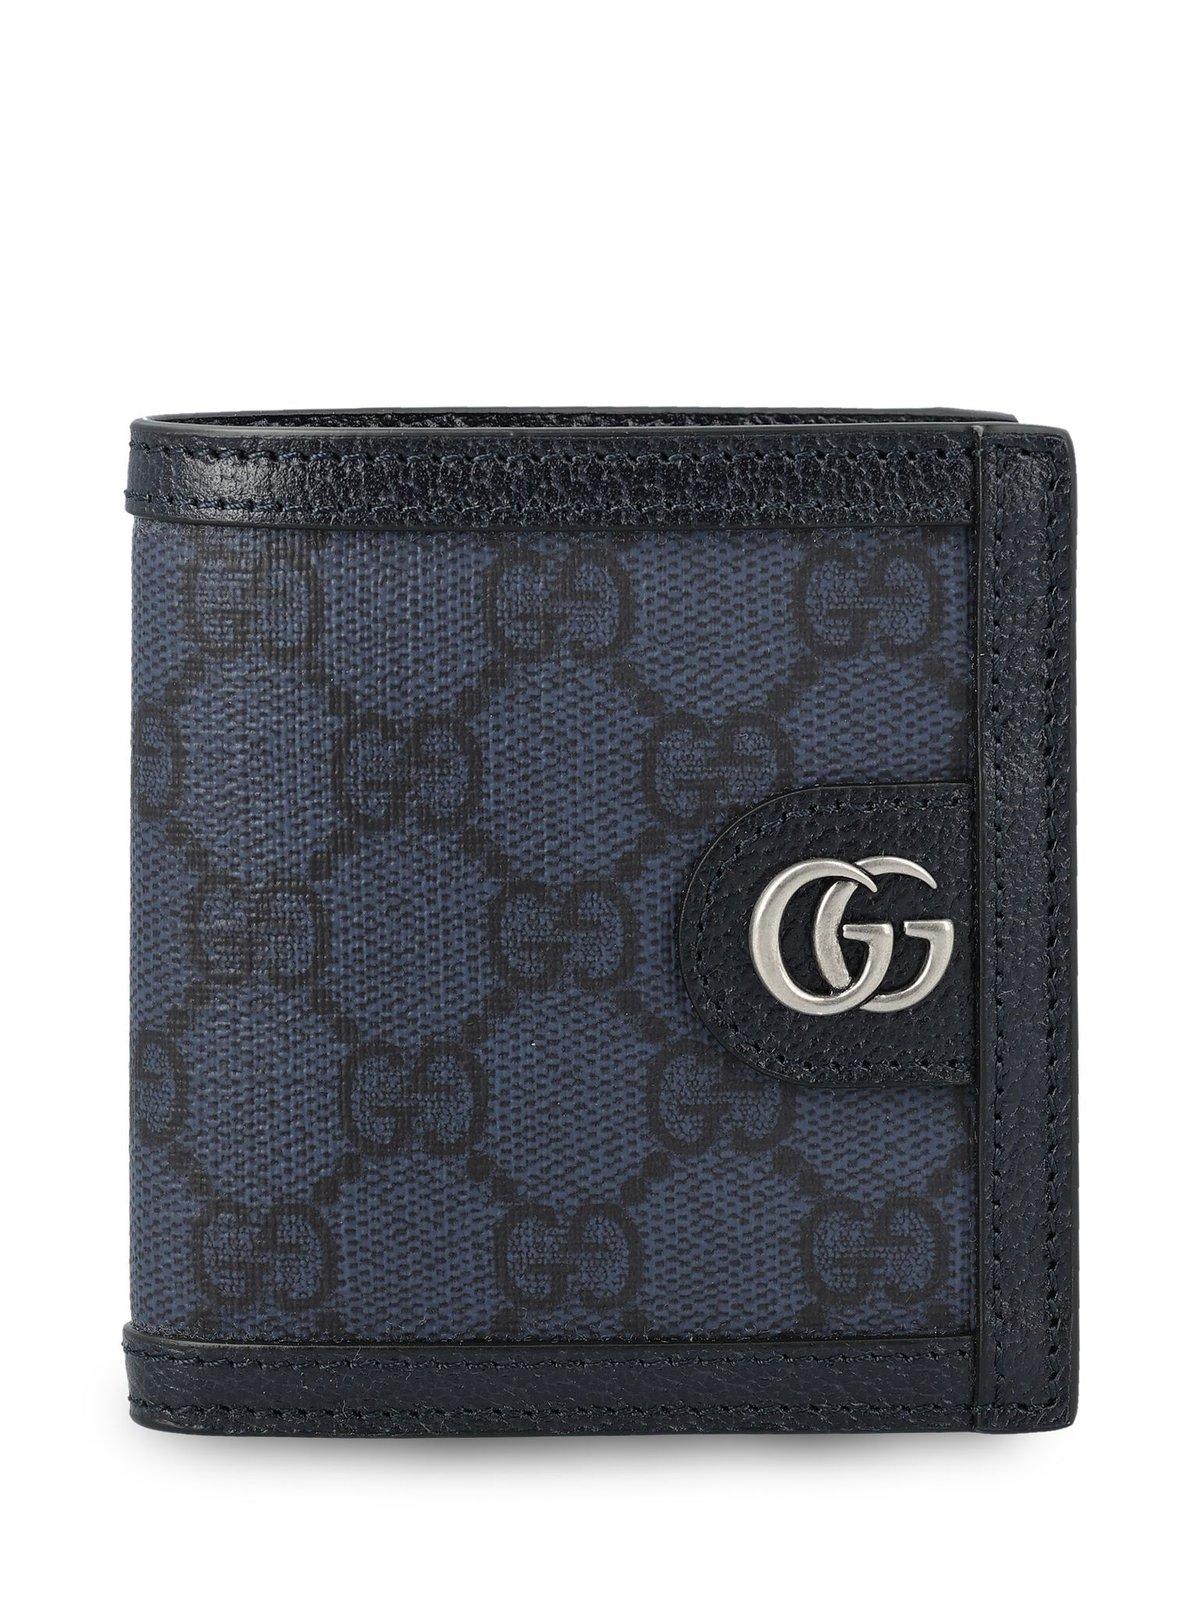 Gucci Ophidia Logo Plaque Bifold Wallet